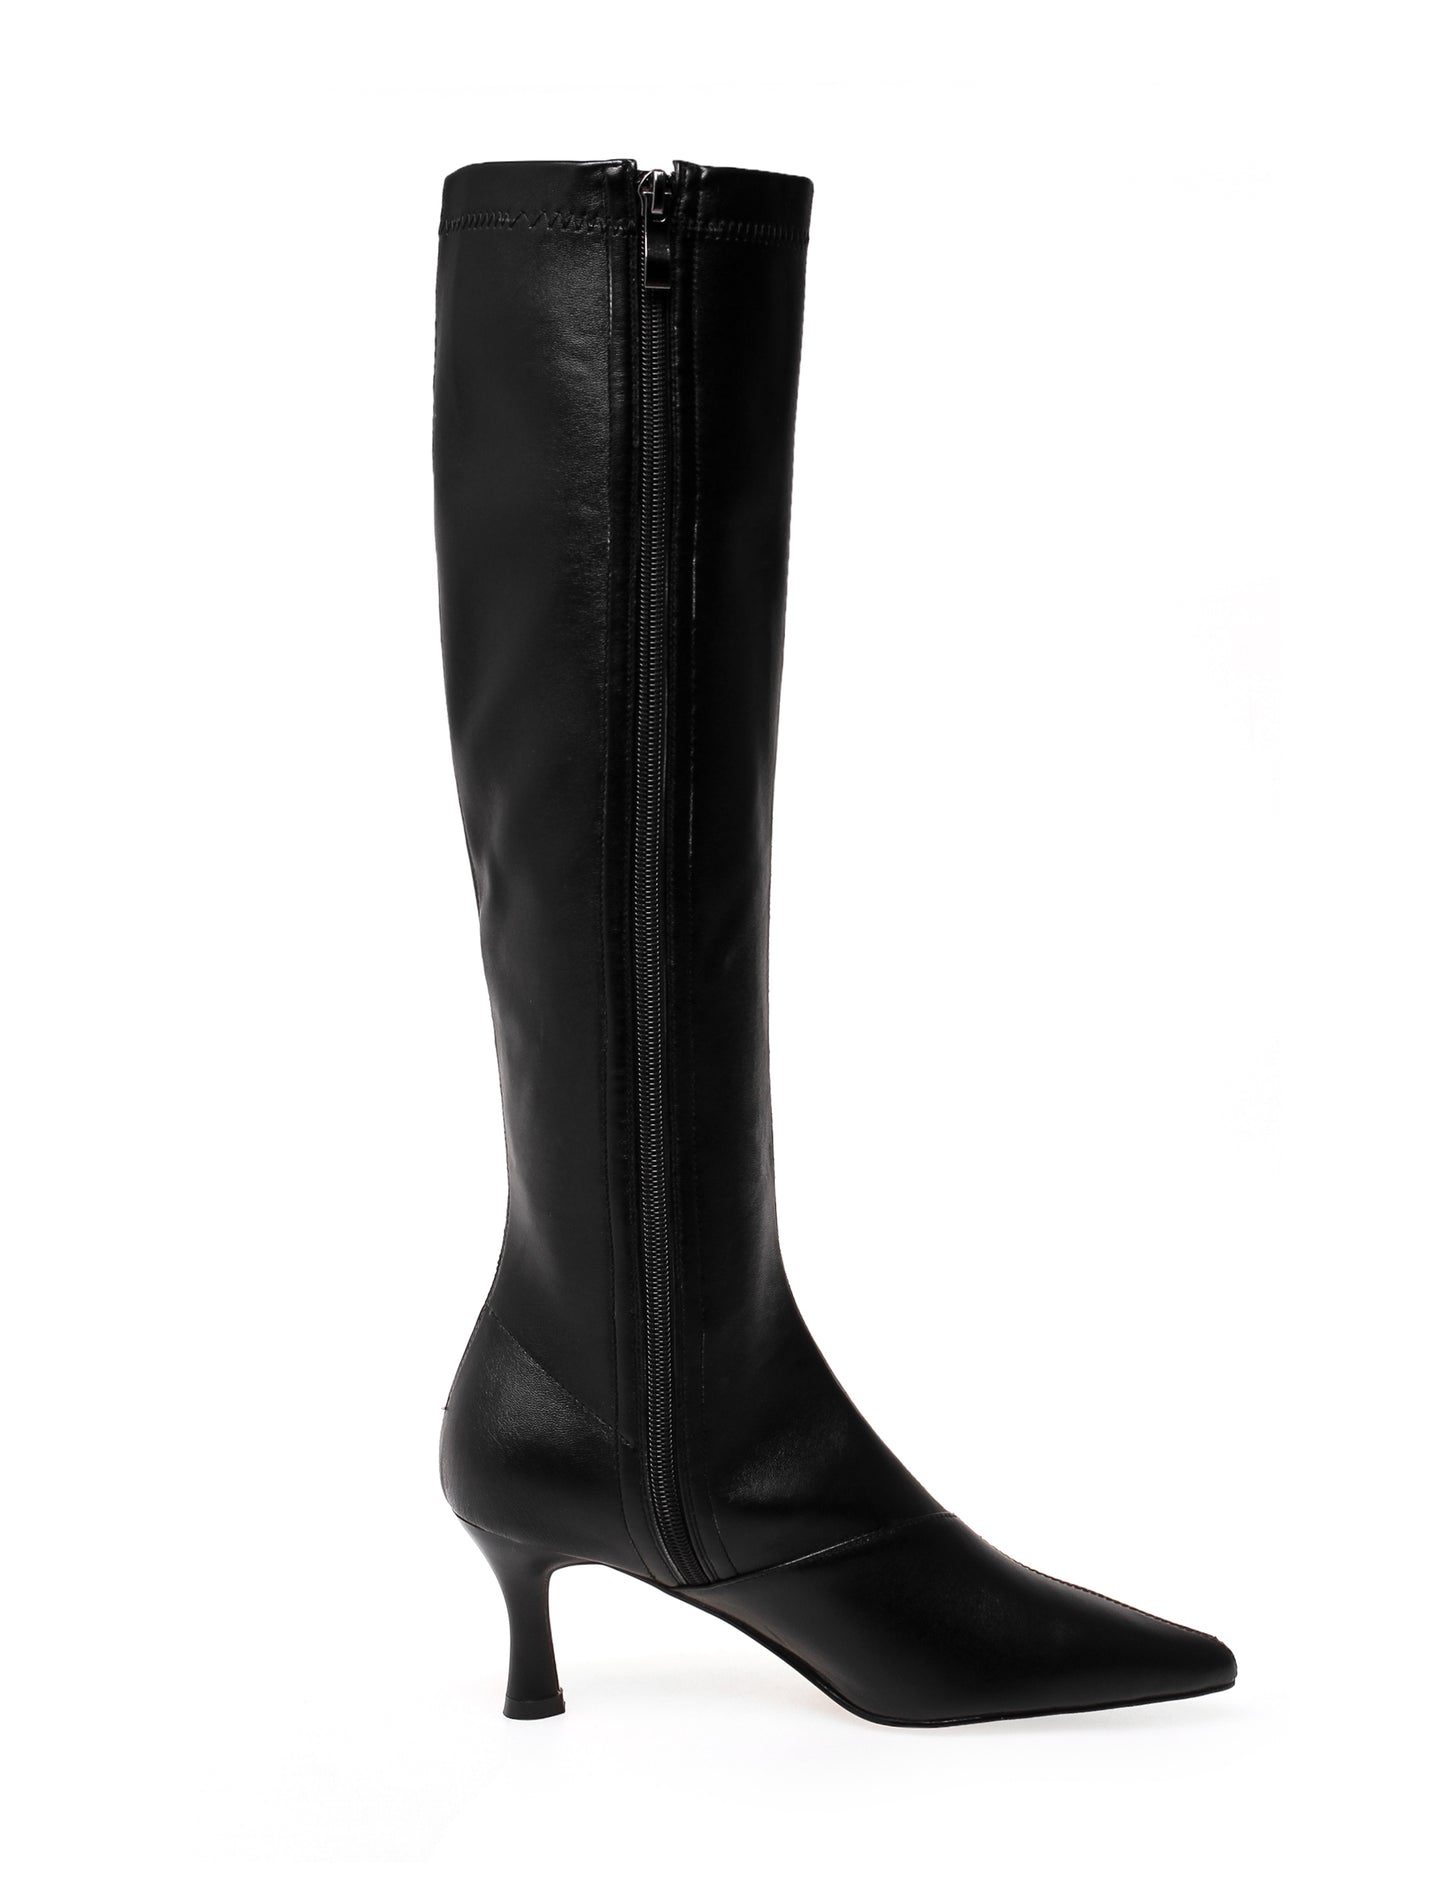 TinaCus Women's Handmade Genuine Leather with Elastic Fabric Pointed Toe Side Zip Mid Heel Stylish Knee High Boots